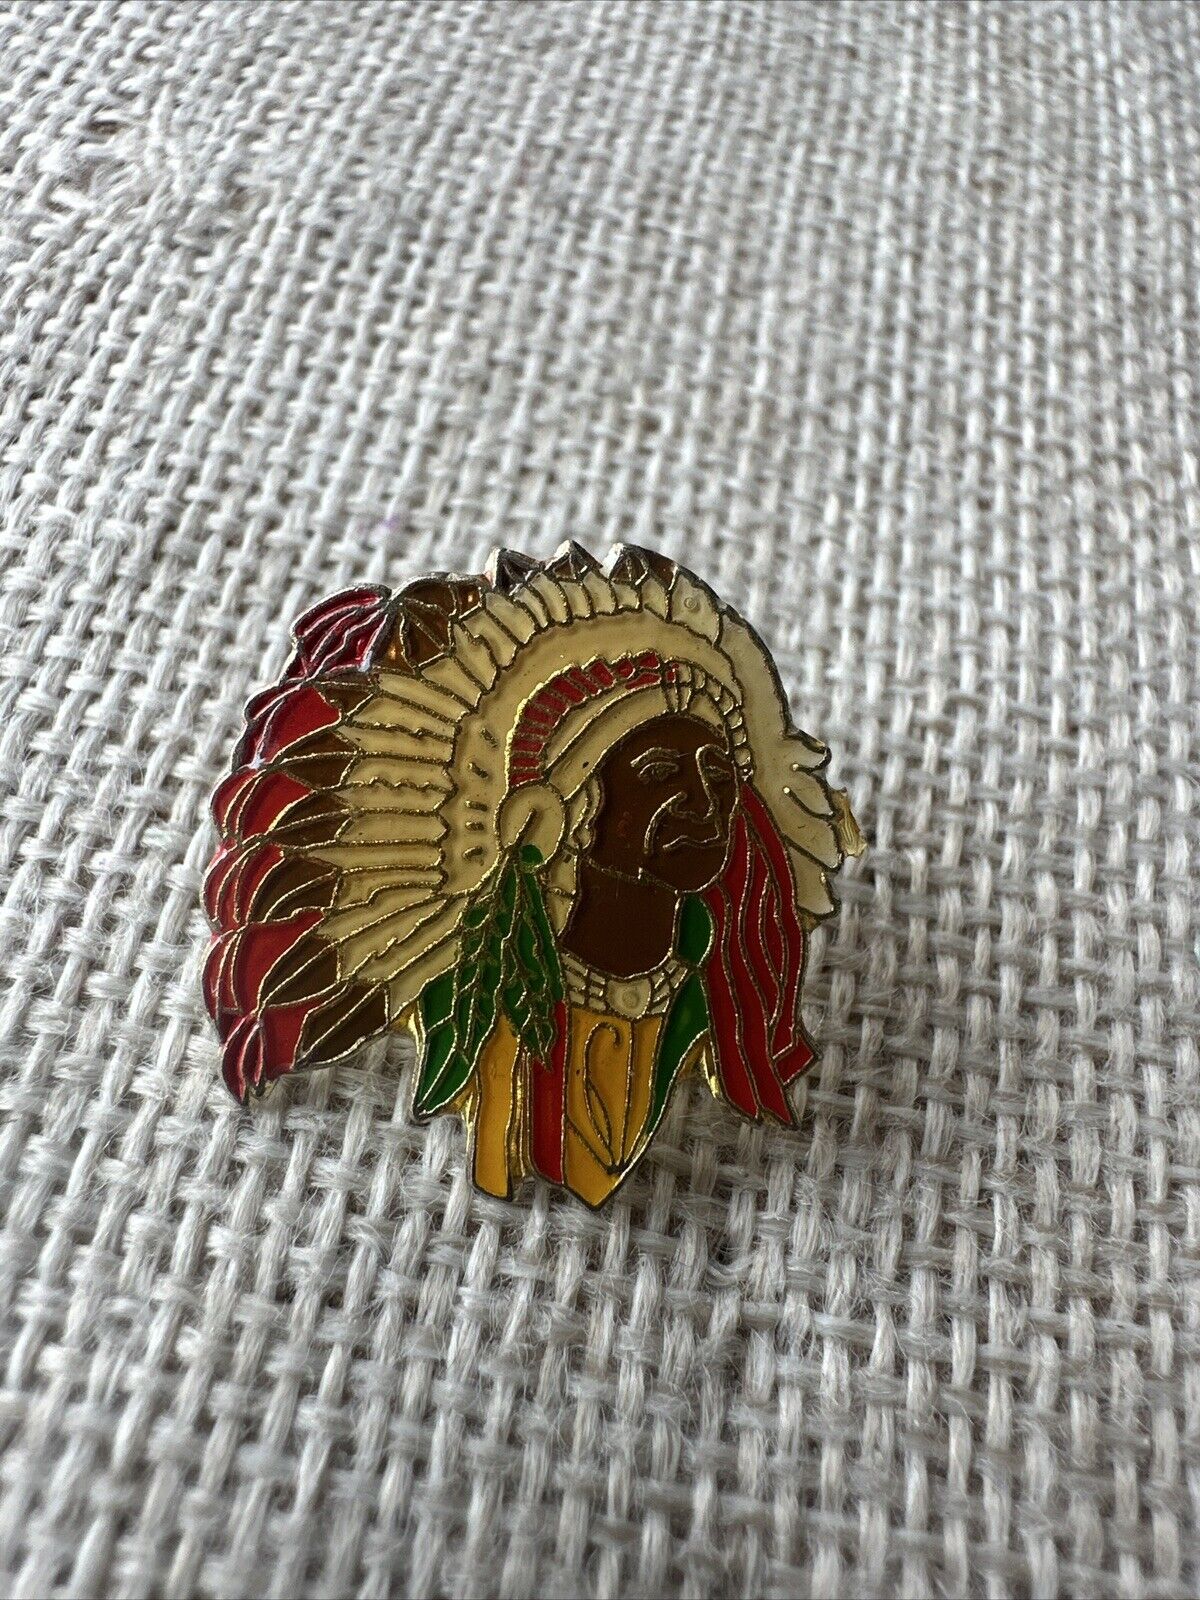 NATIVE AMERICAN - INDIAN CHIEF COLORFUL HEADDRESS - VINTAGE LAPEL PIN  7/8 x 7/8